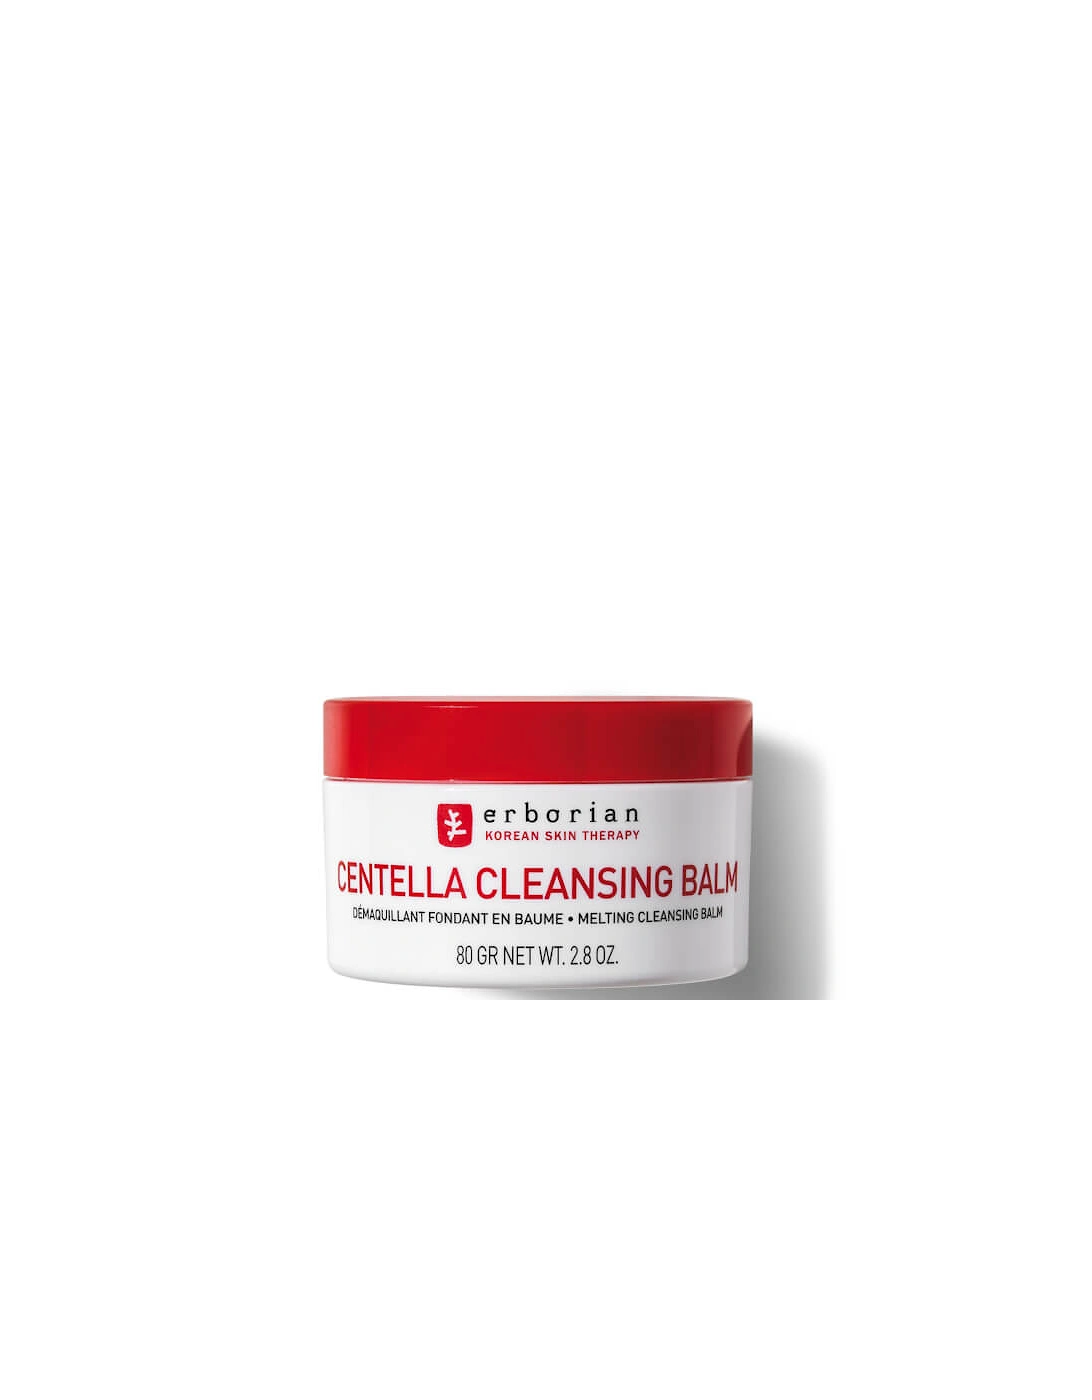 Centella Cleansing Balm, 2 of 1